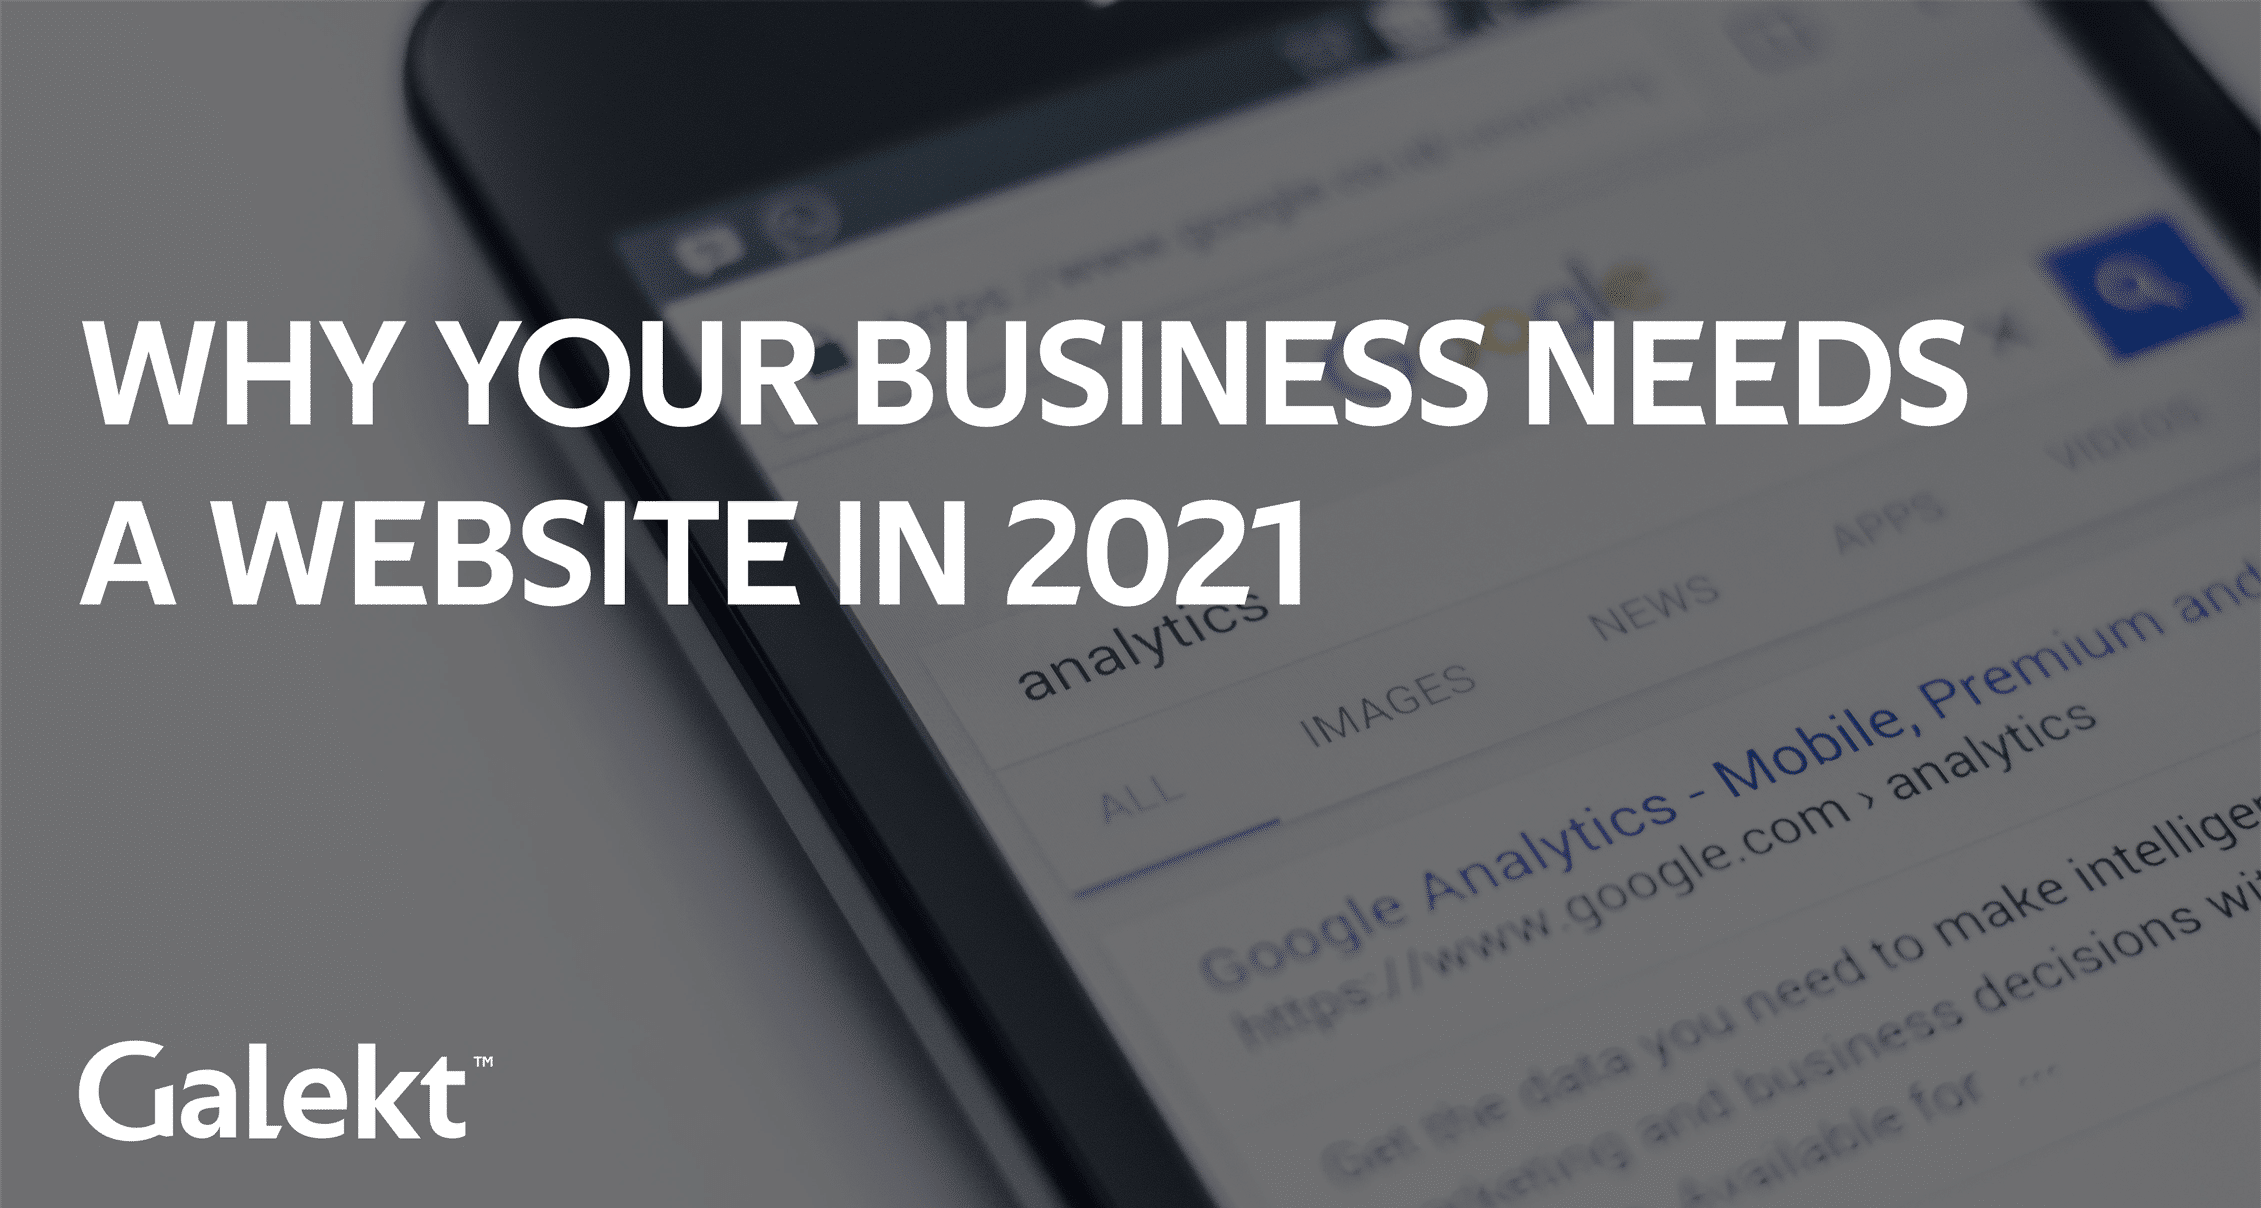 Why your business needs a website in 2021 by Galekt